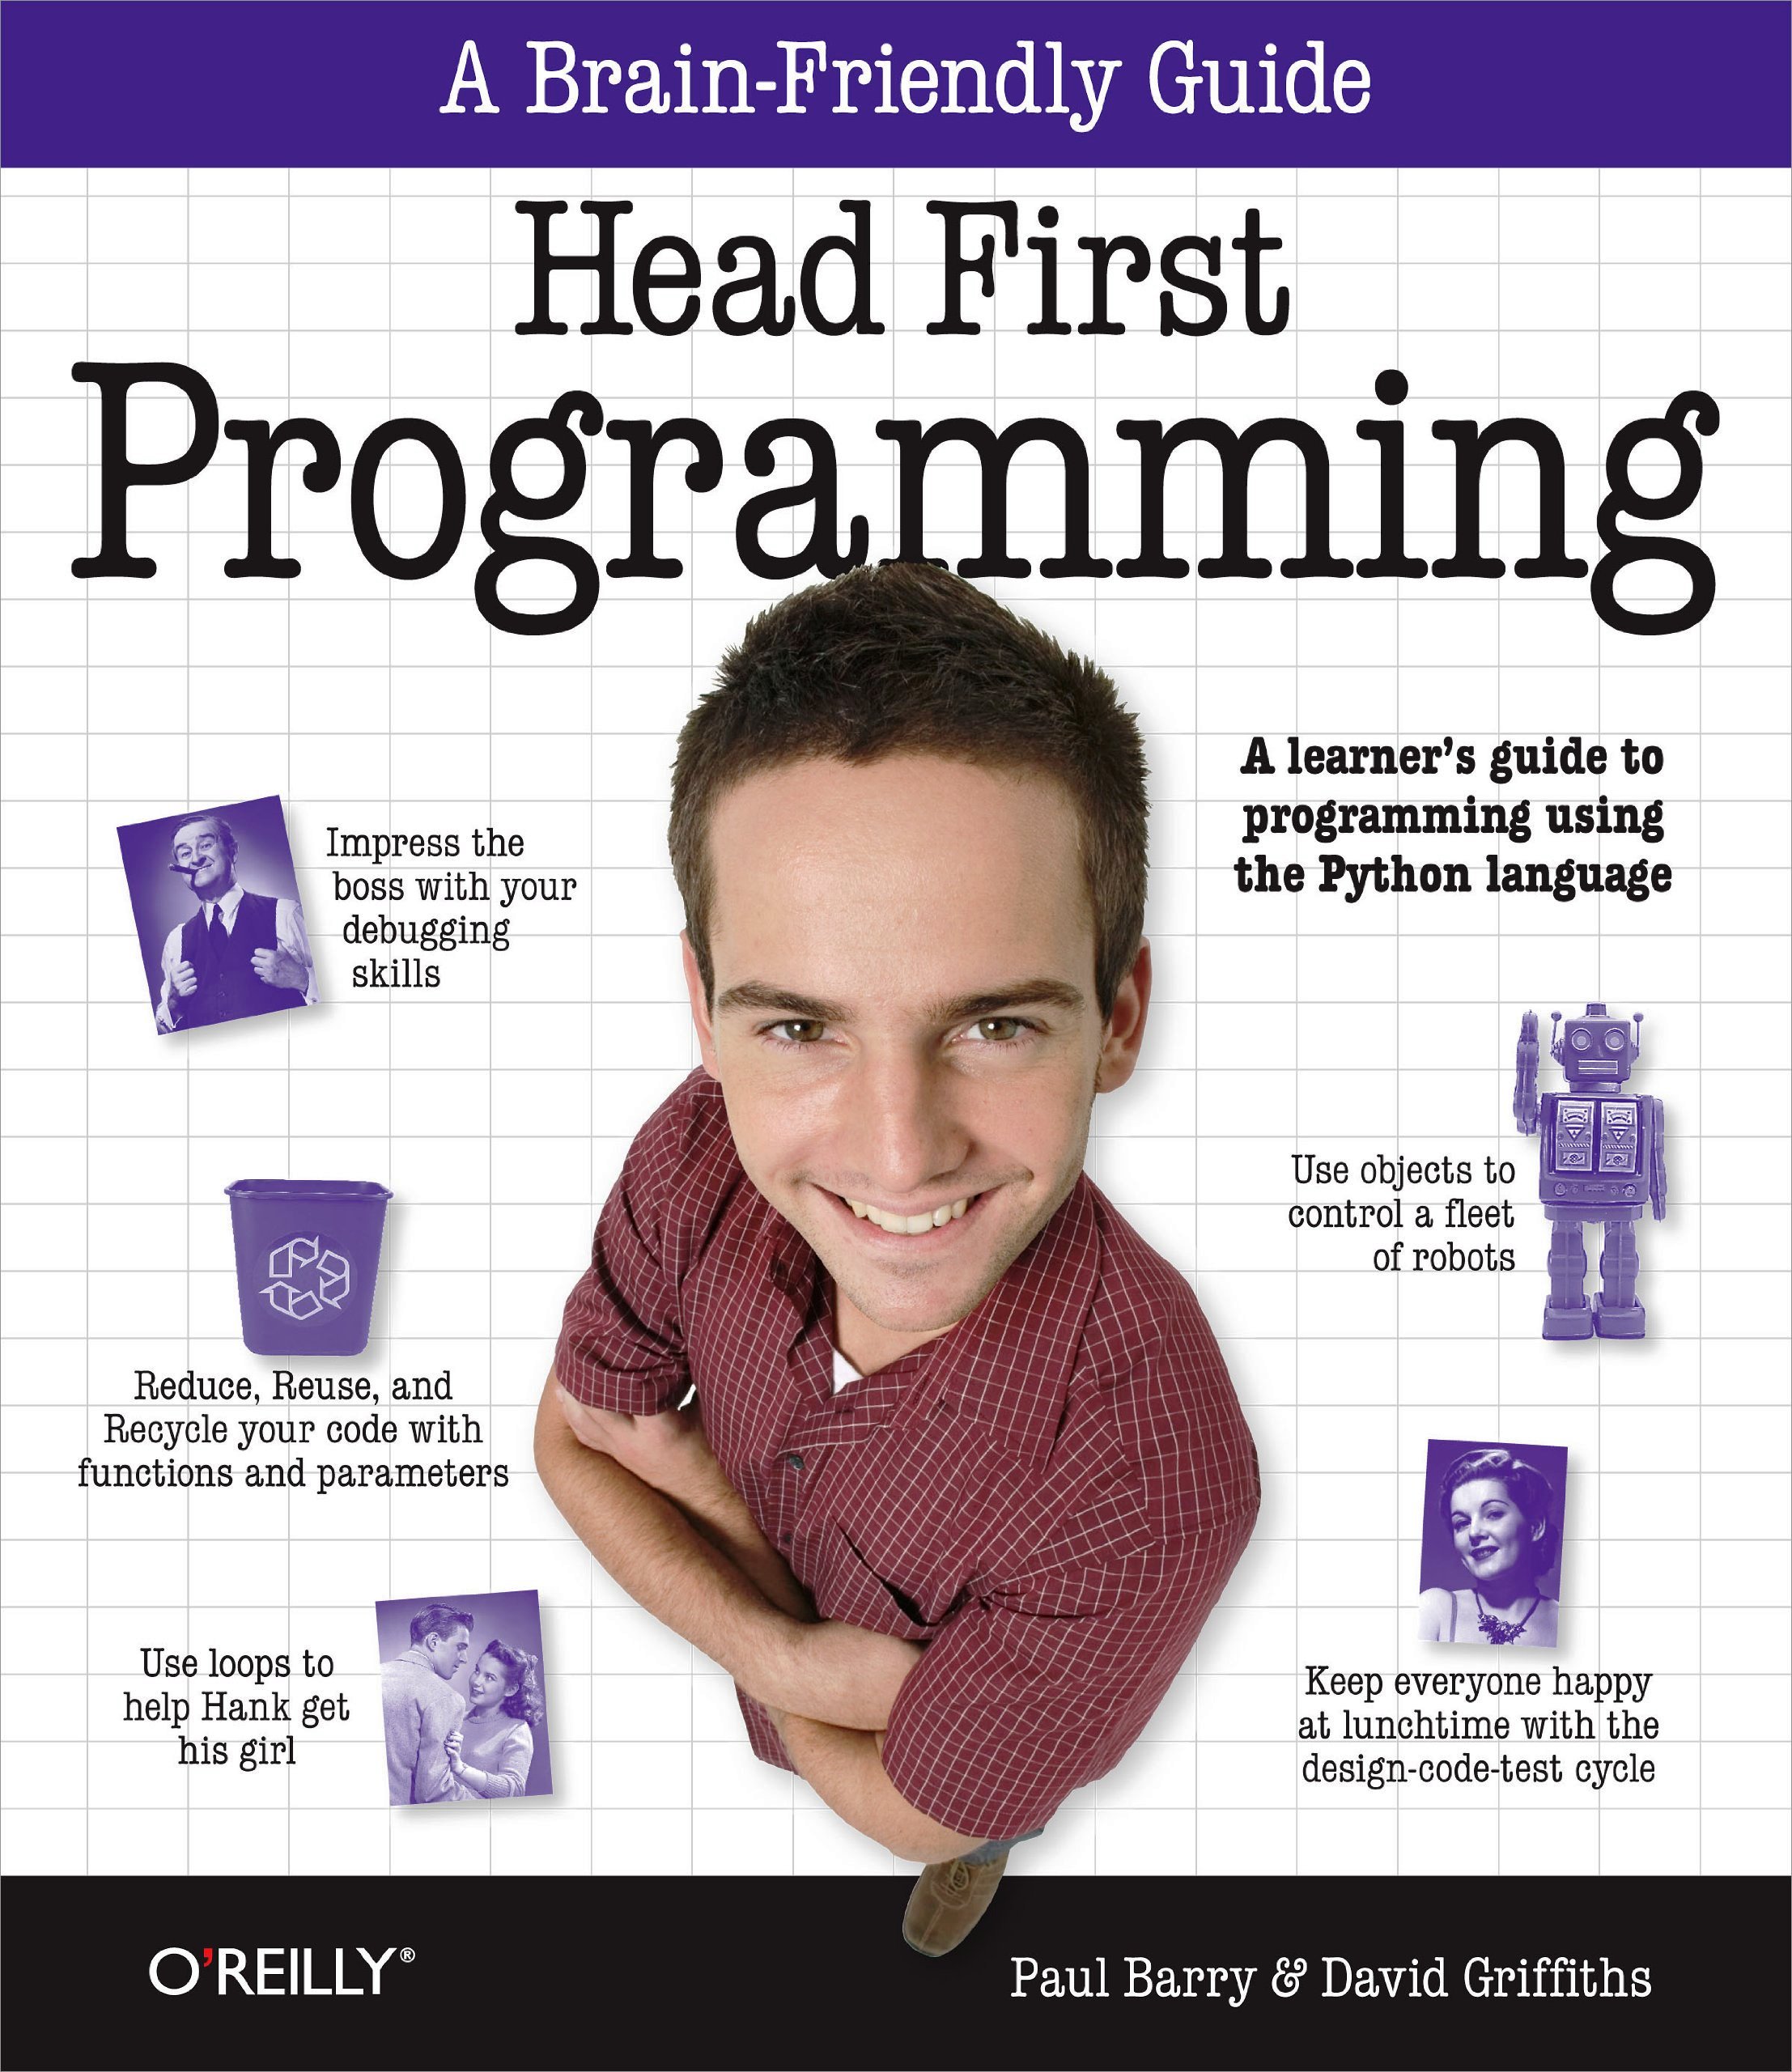 Head first programming a learner's guide to programming using the Python language Free PDF BOok